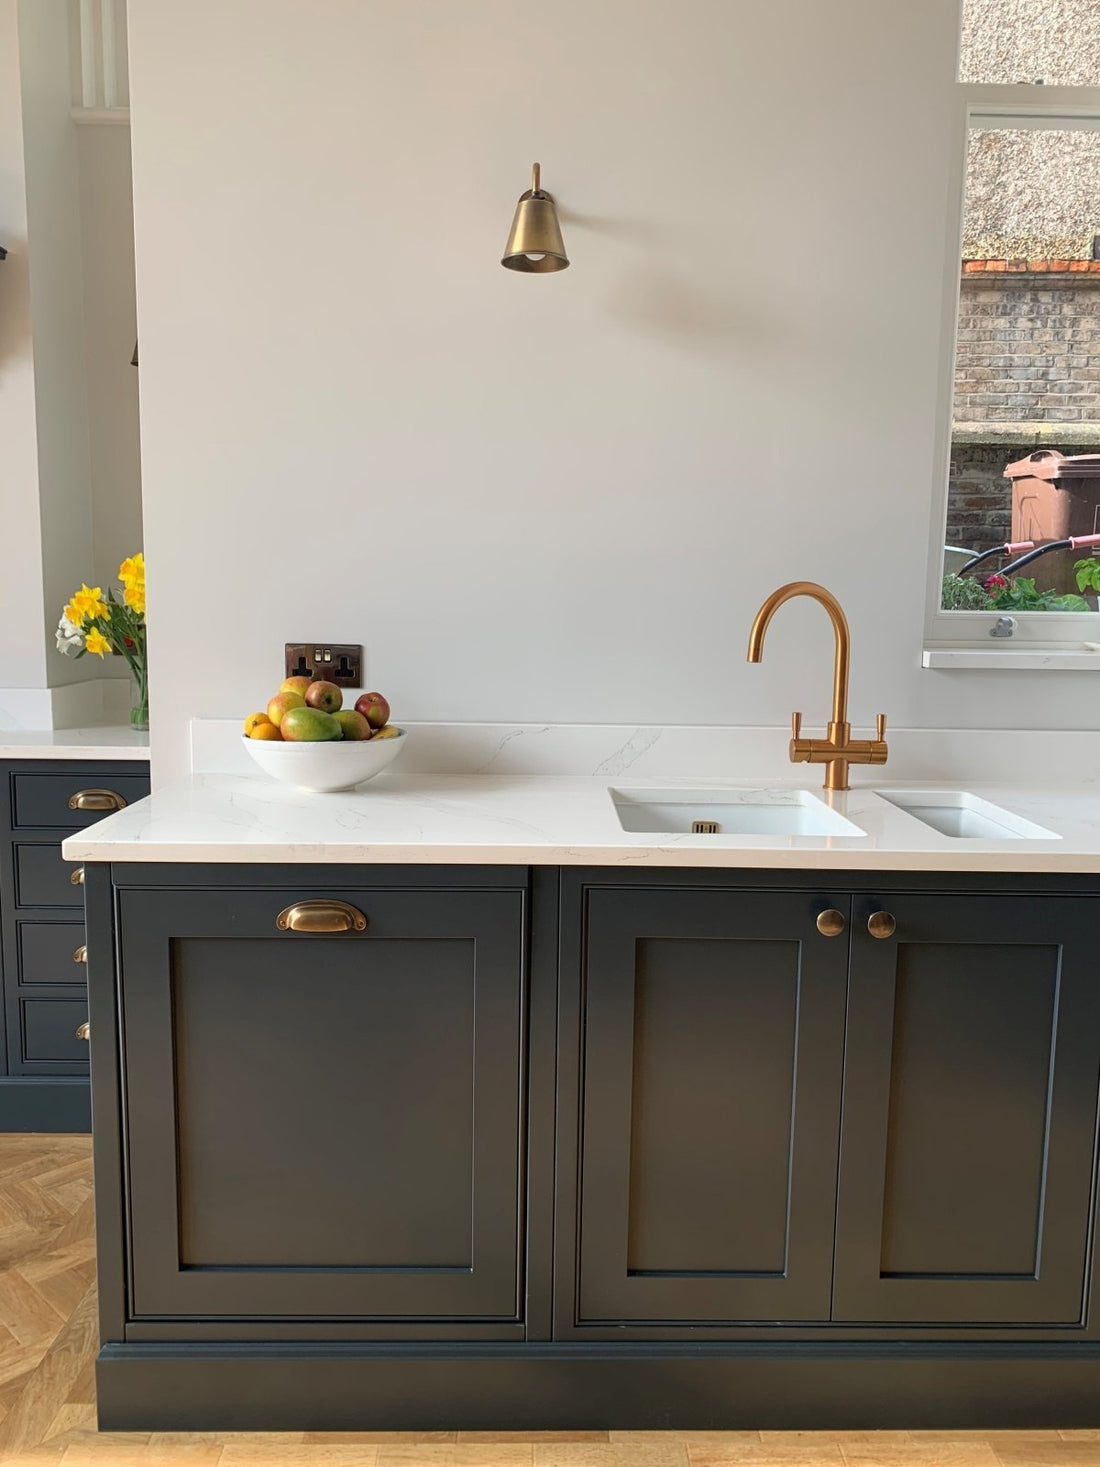 Where should a sink go in a kitchen? - Classic Kitchens Direct